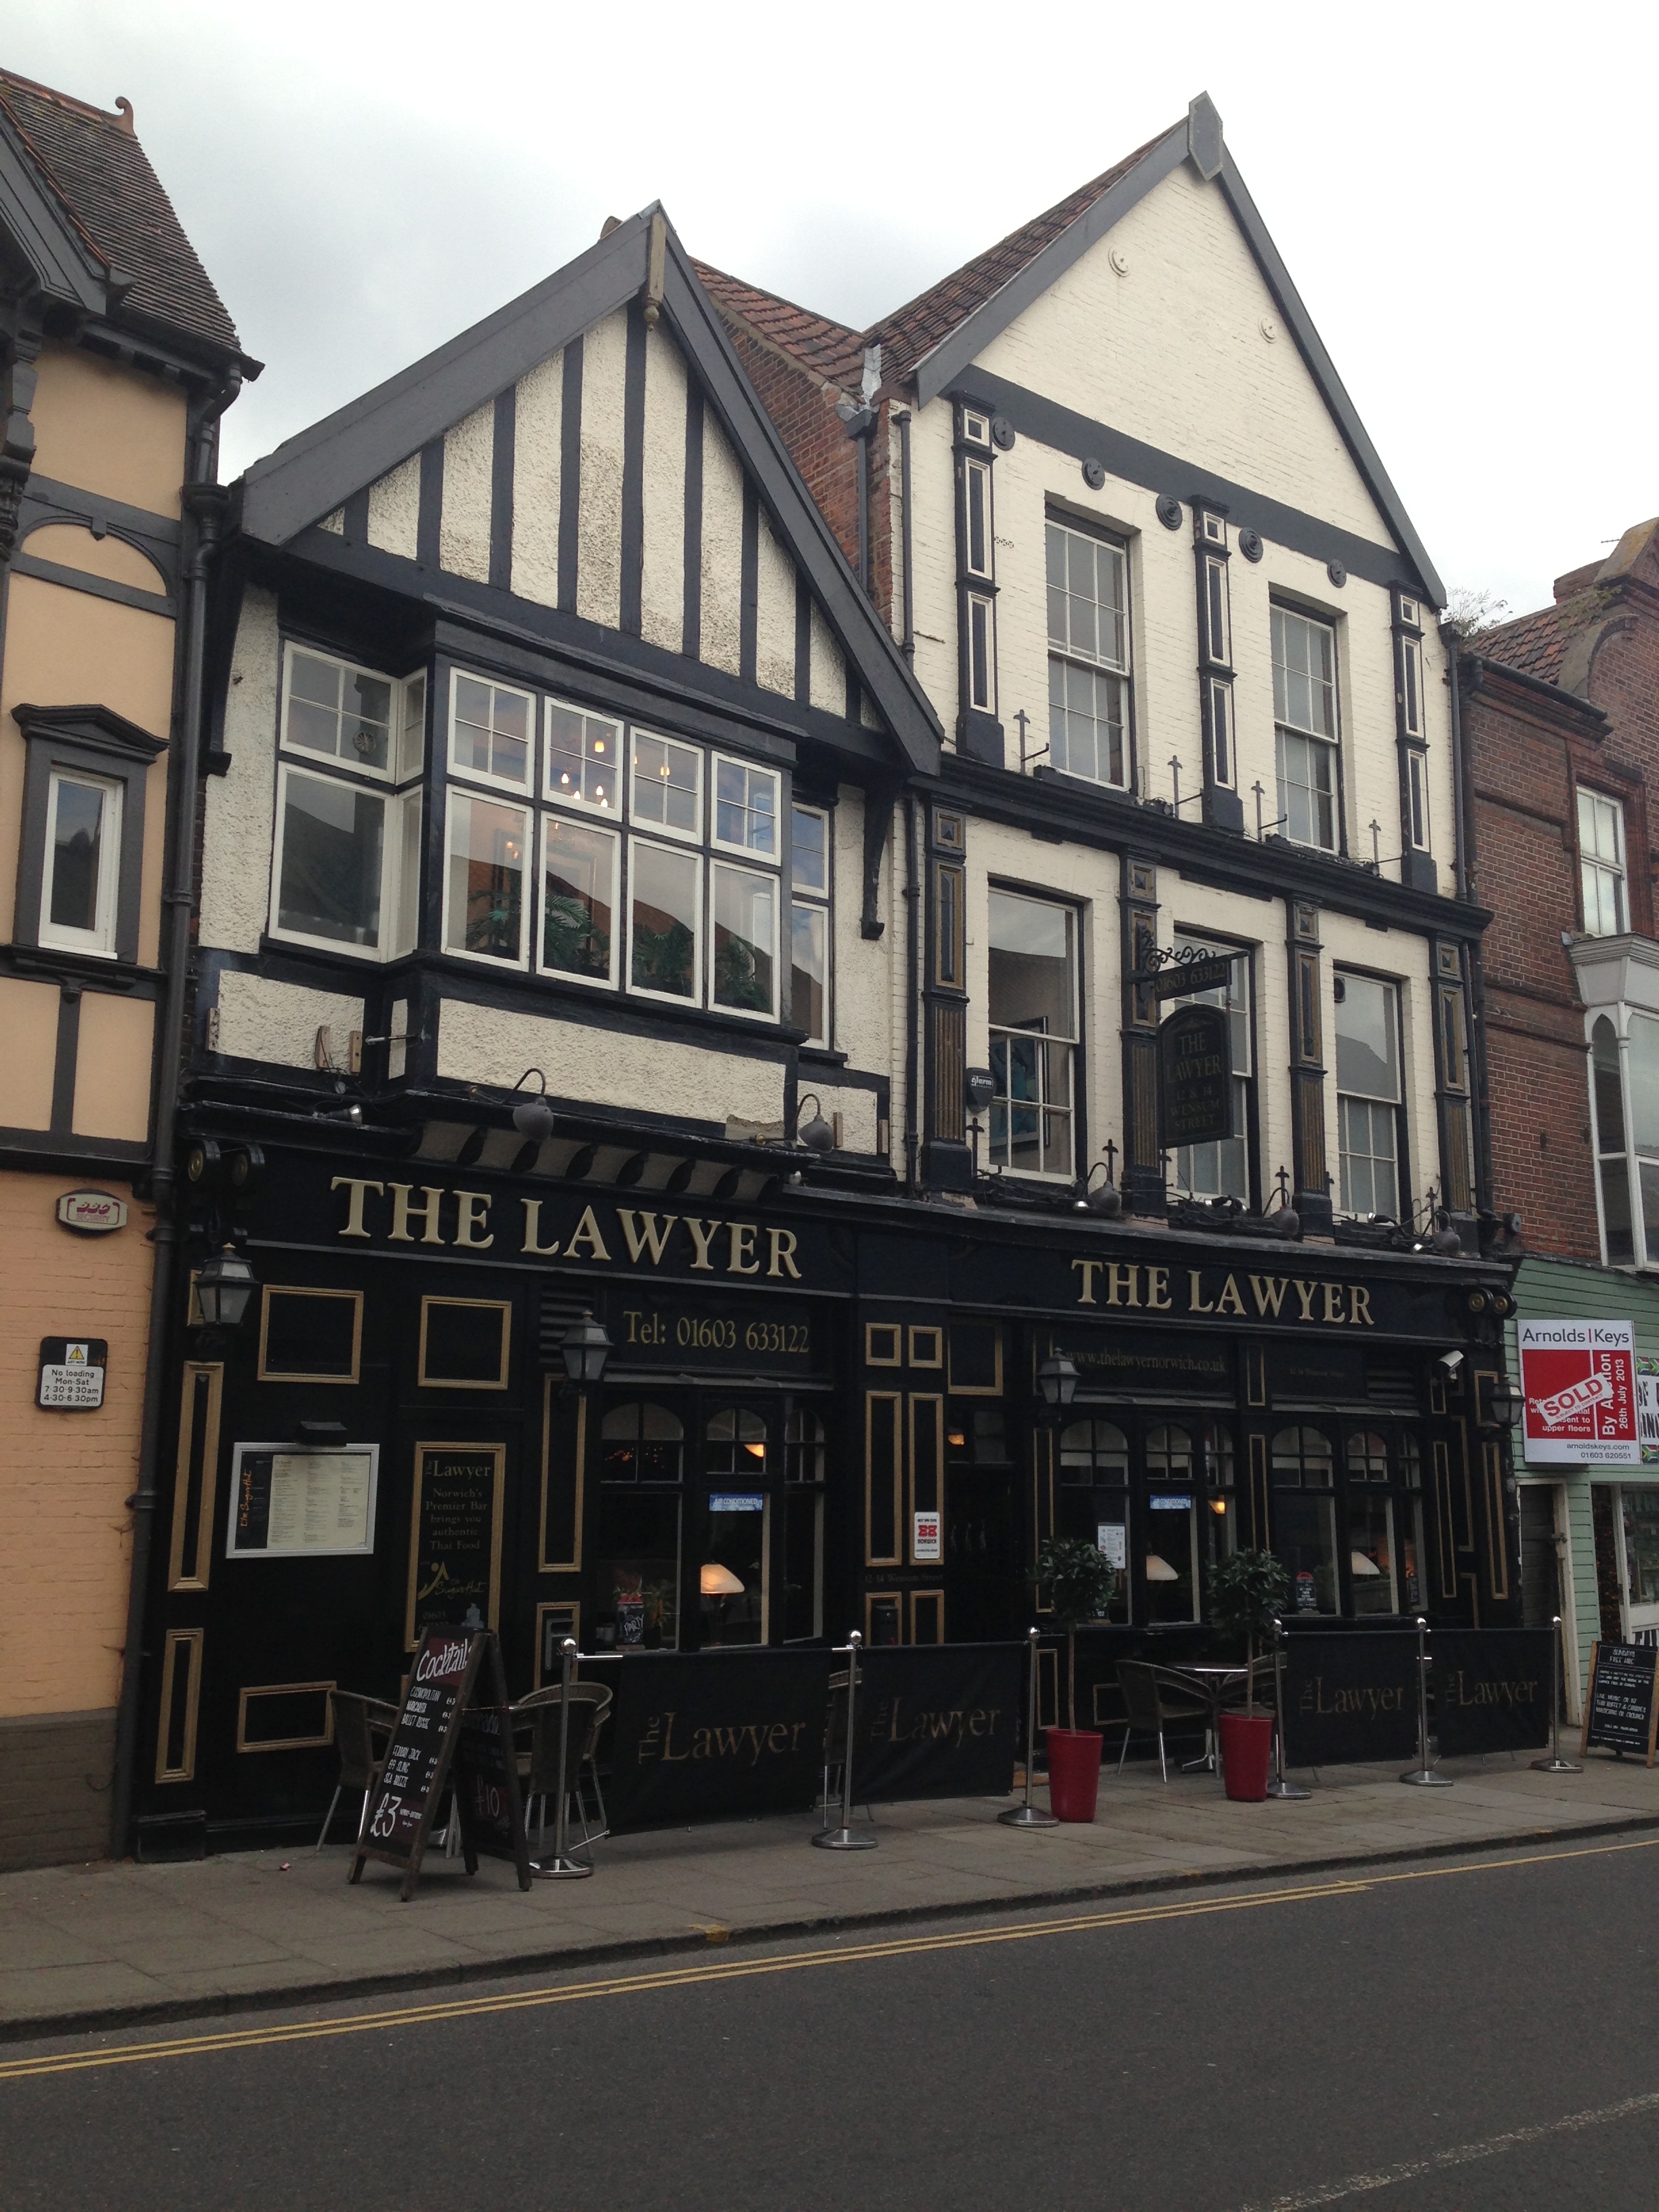 LAWYER PUBLIC HOUSE, THE